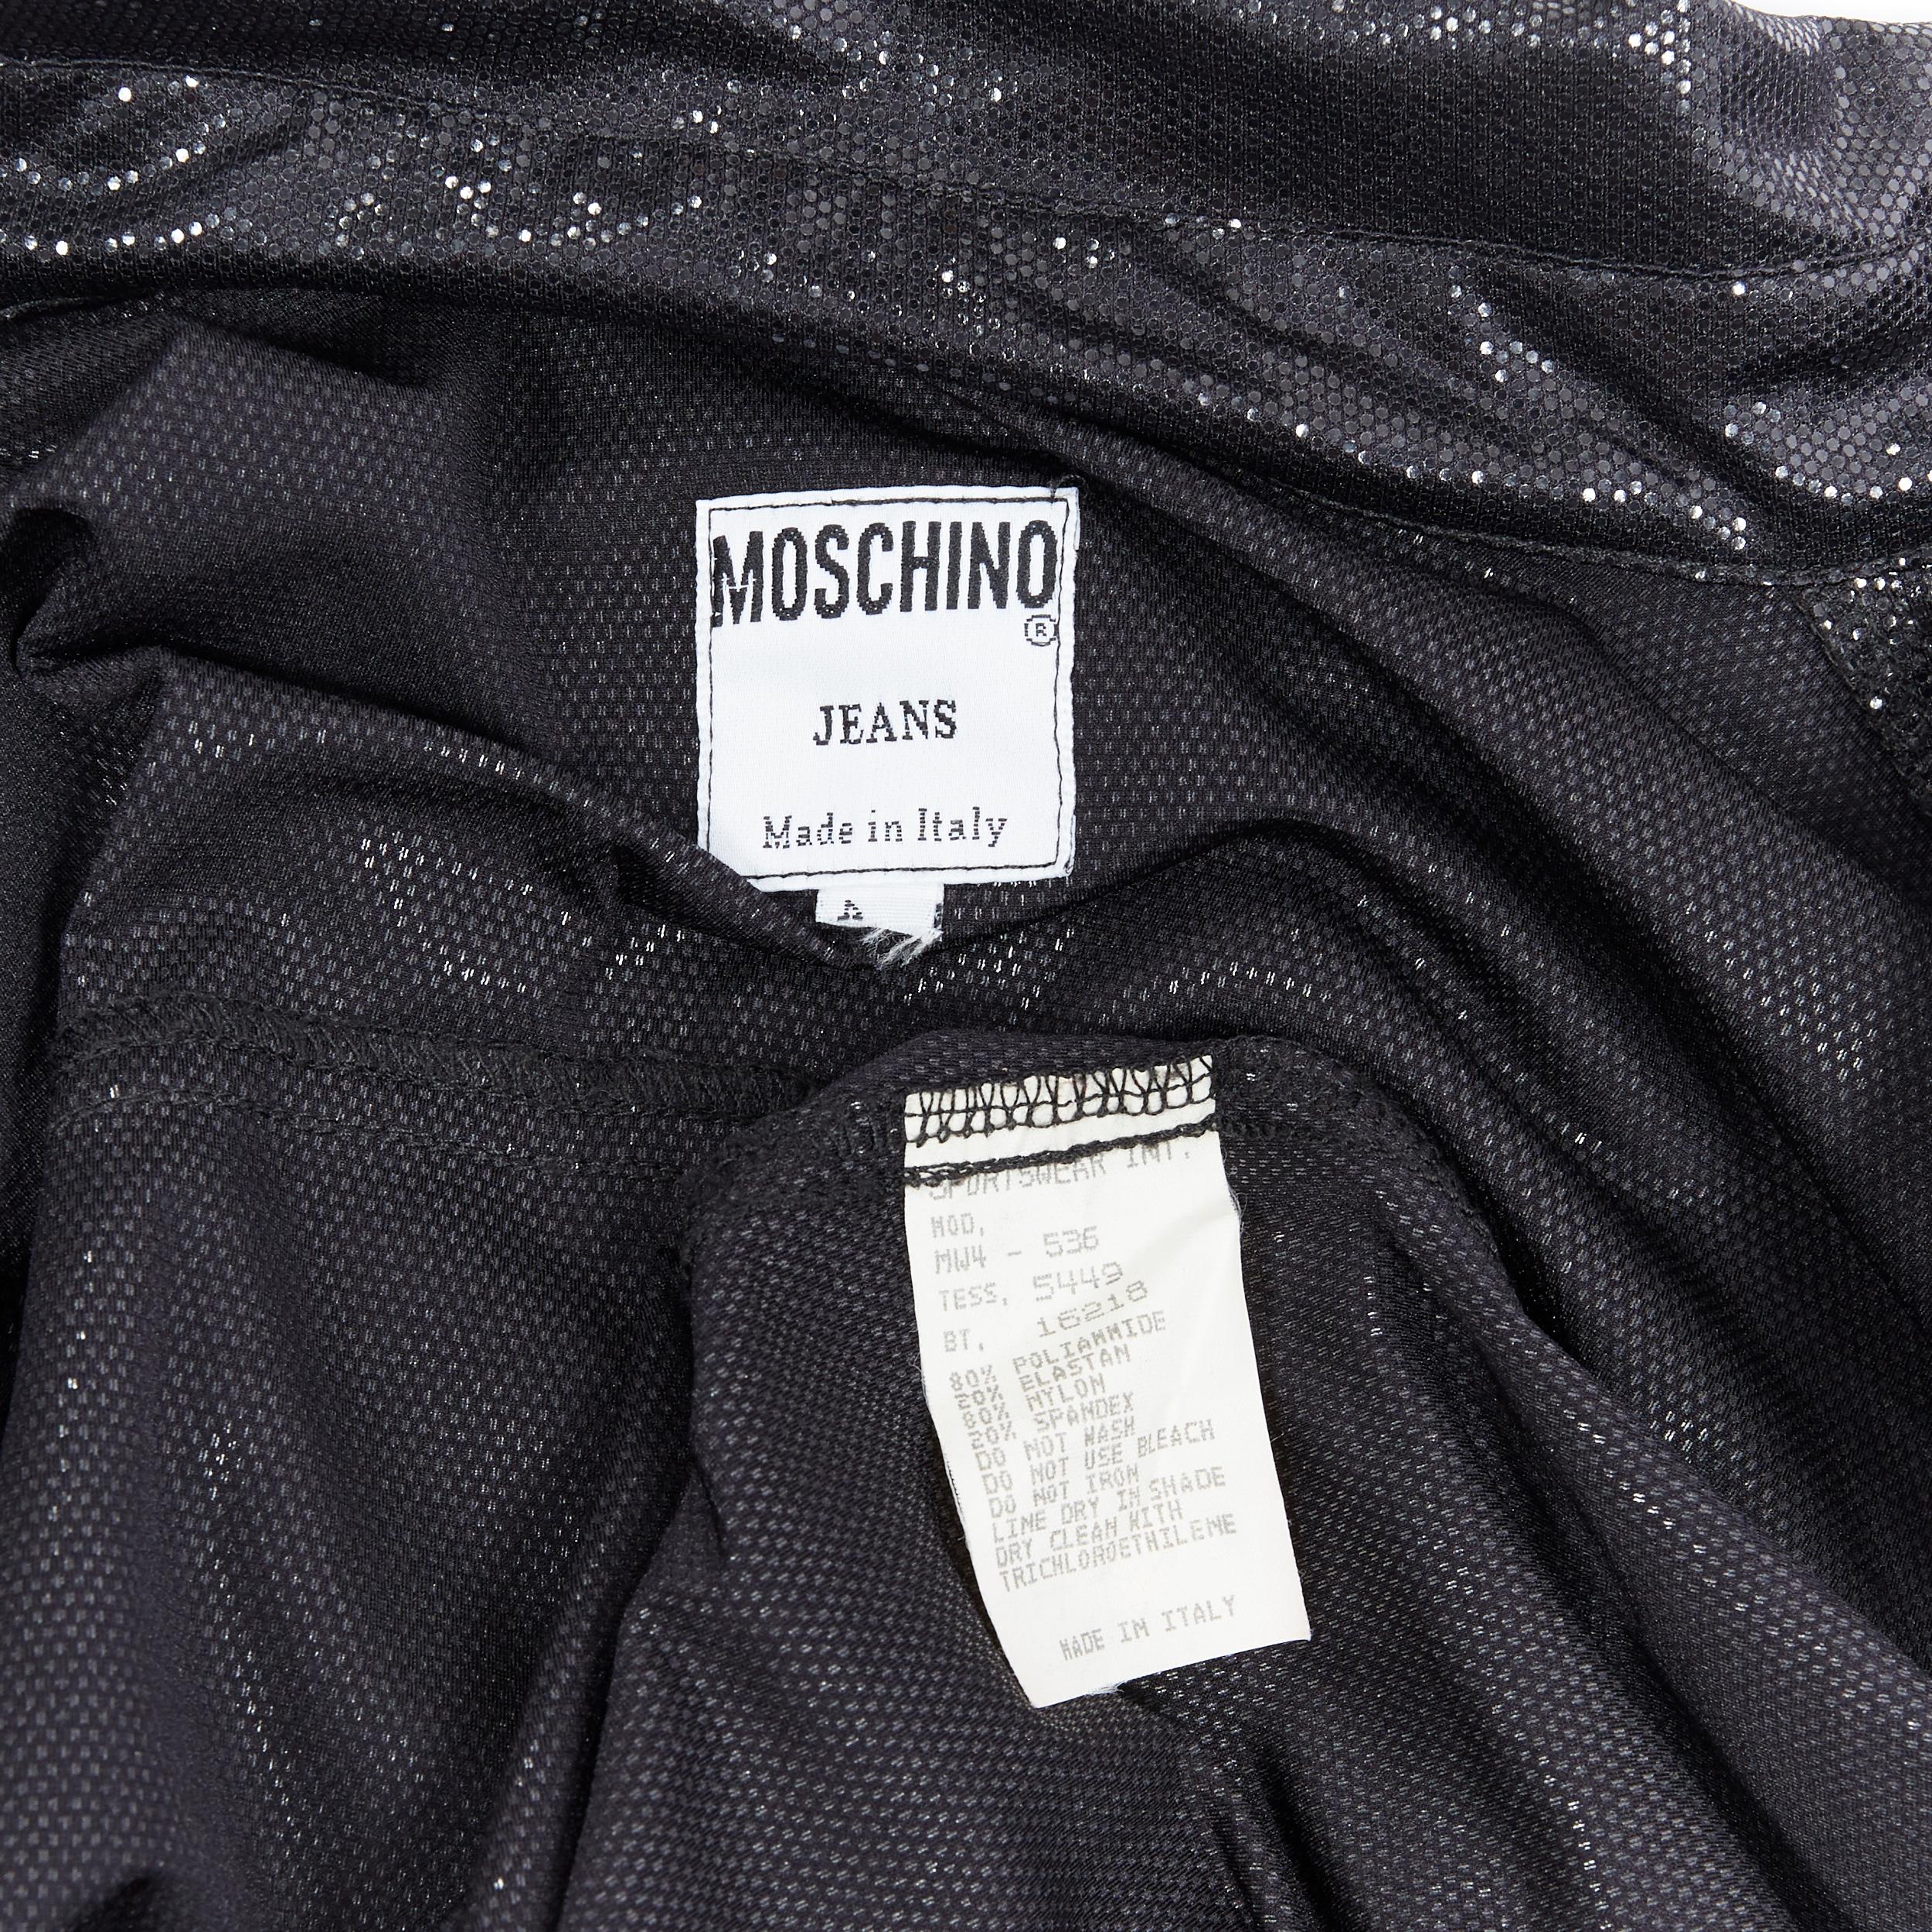 MOSCHINO JEANS black shimmery wet look patched pocket long sleeve shirt S 3